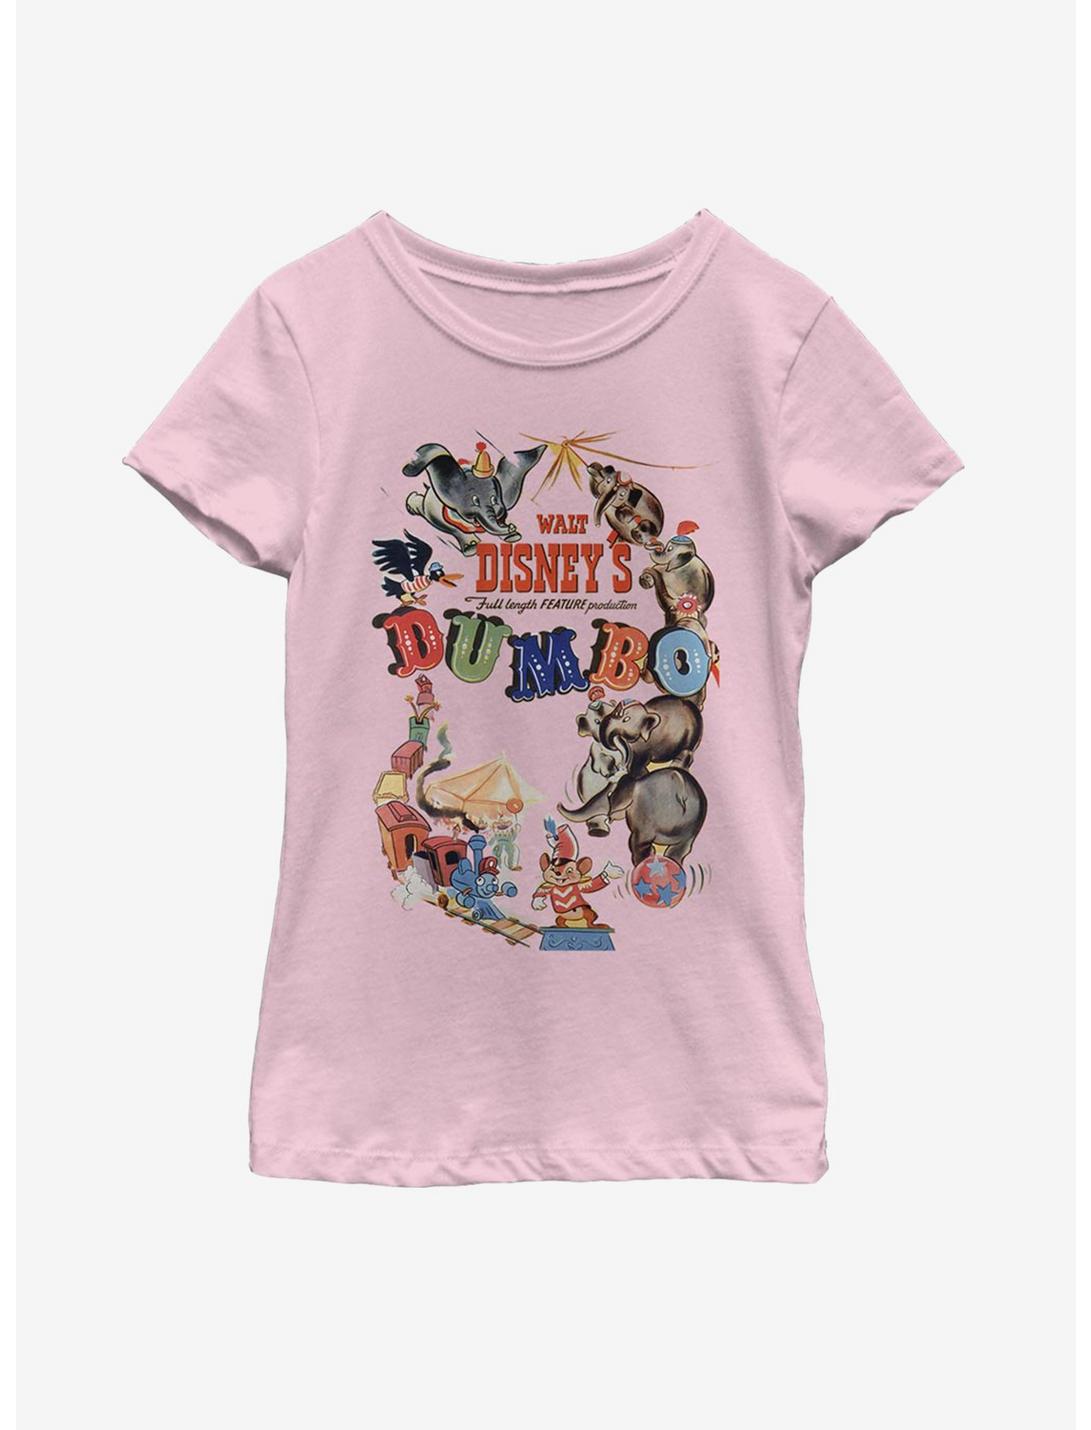 Disney Dumbo Theatrical Poster Youth Girls T-Shirt, PINK, hi-res